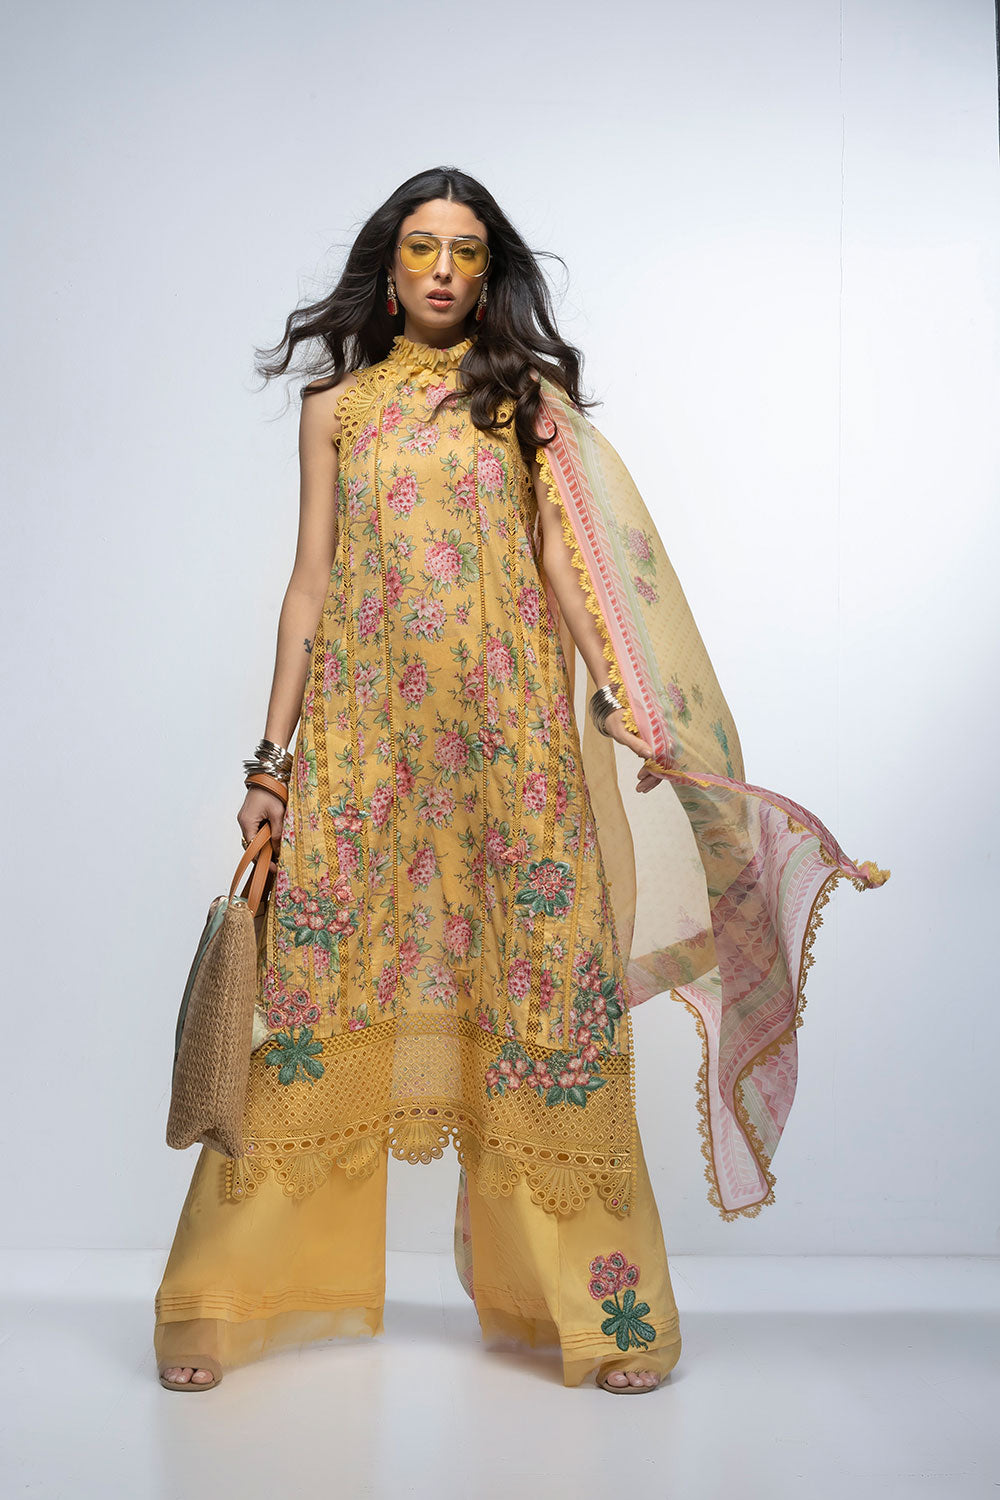 Buy Now, D#1B - Sobia Nazir Vital 2023 - Vol. 2 - Shahana Collection UK  - Wedding and Bridal Party Dresses - Sobia Nazir in UK - Summer Lawn 2023